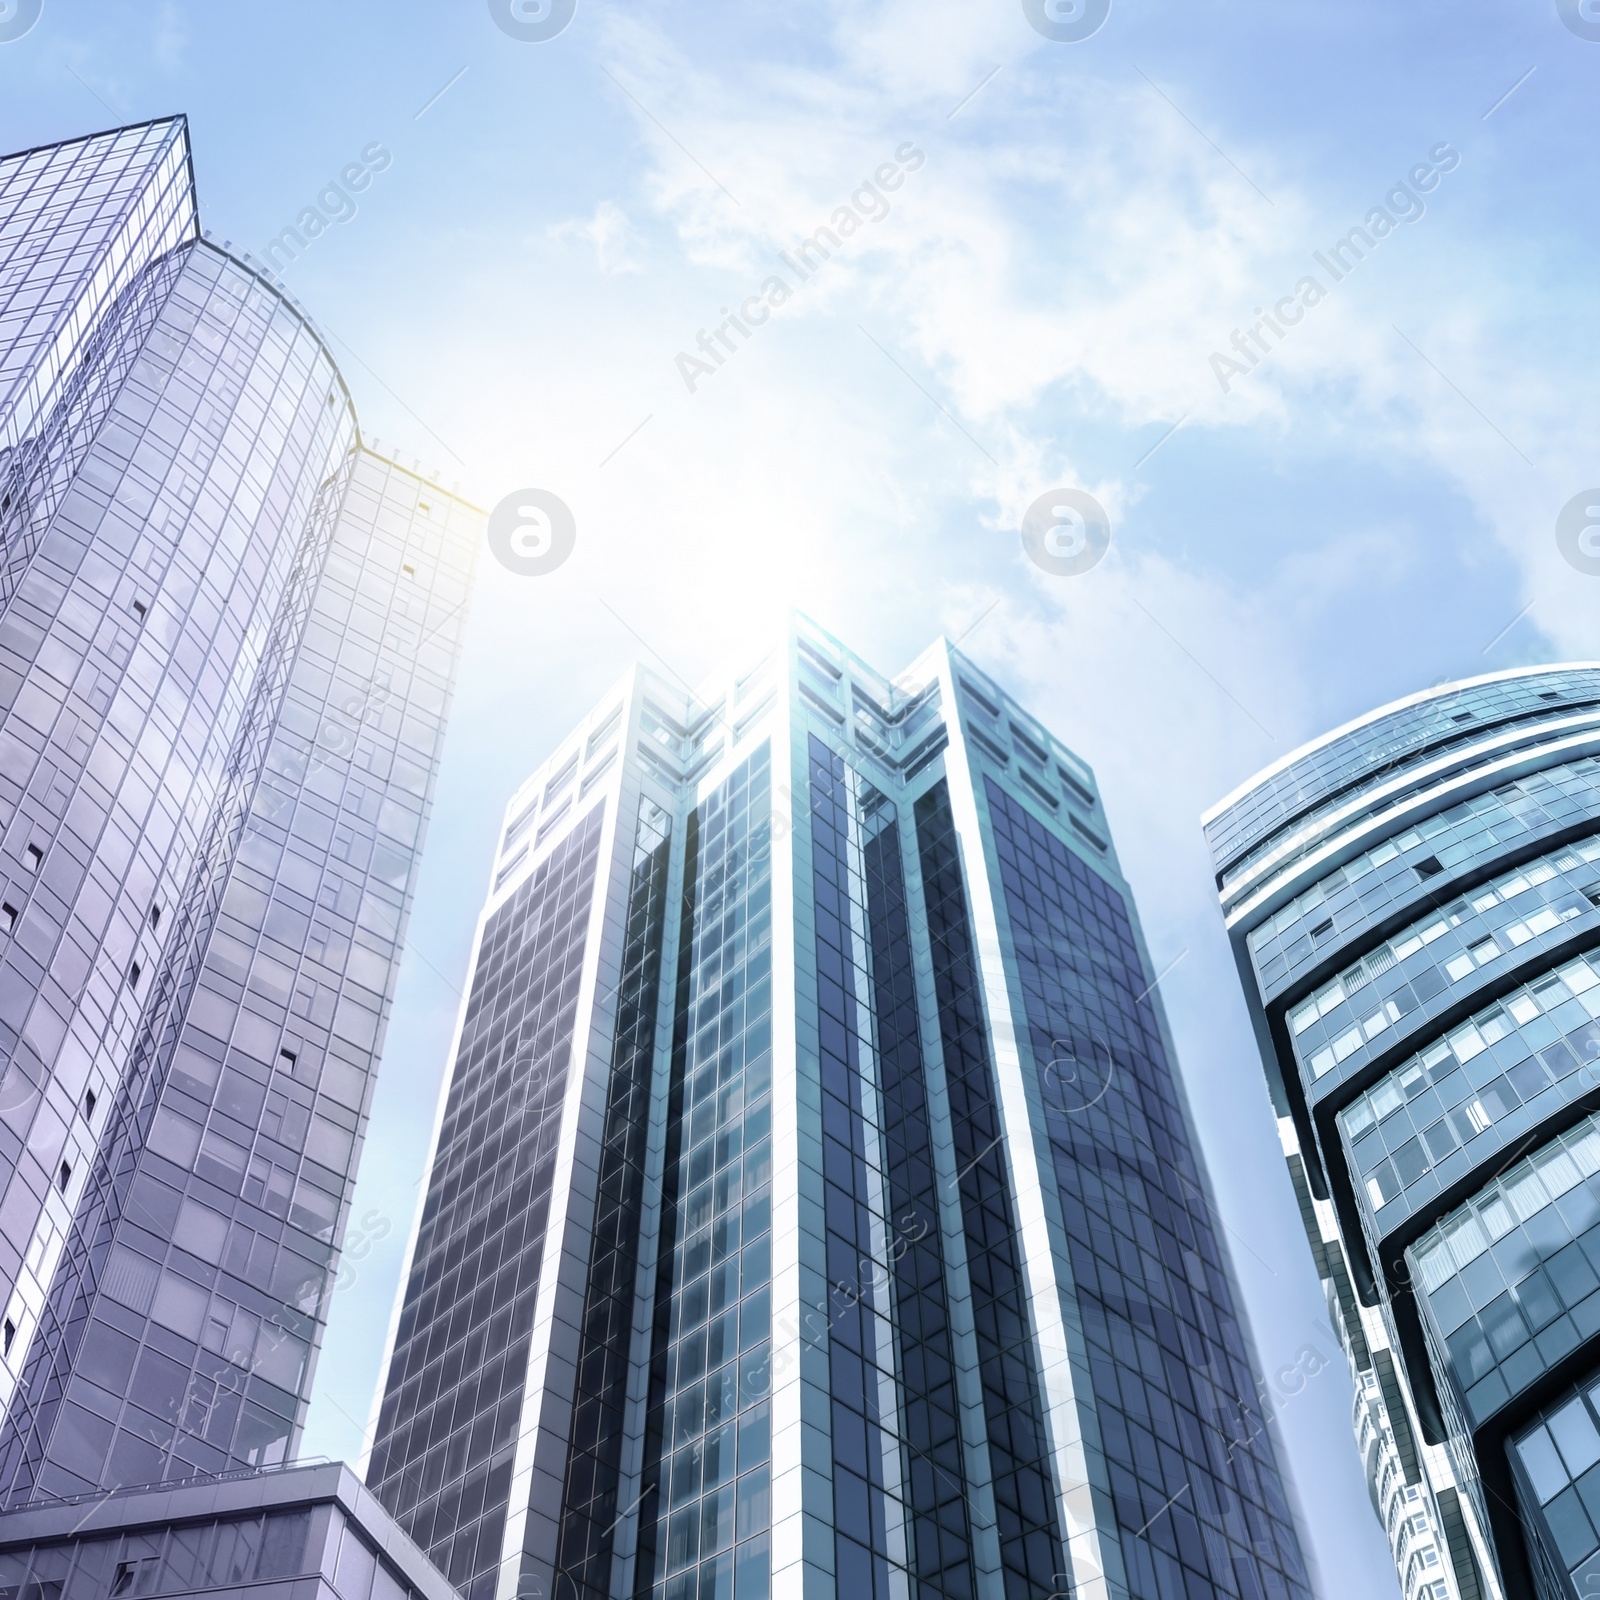 Image of Office buildings with tinted windows, low angle view. Modern architectural corporation 